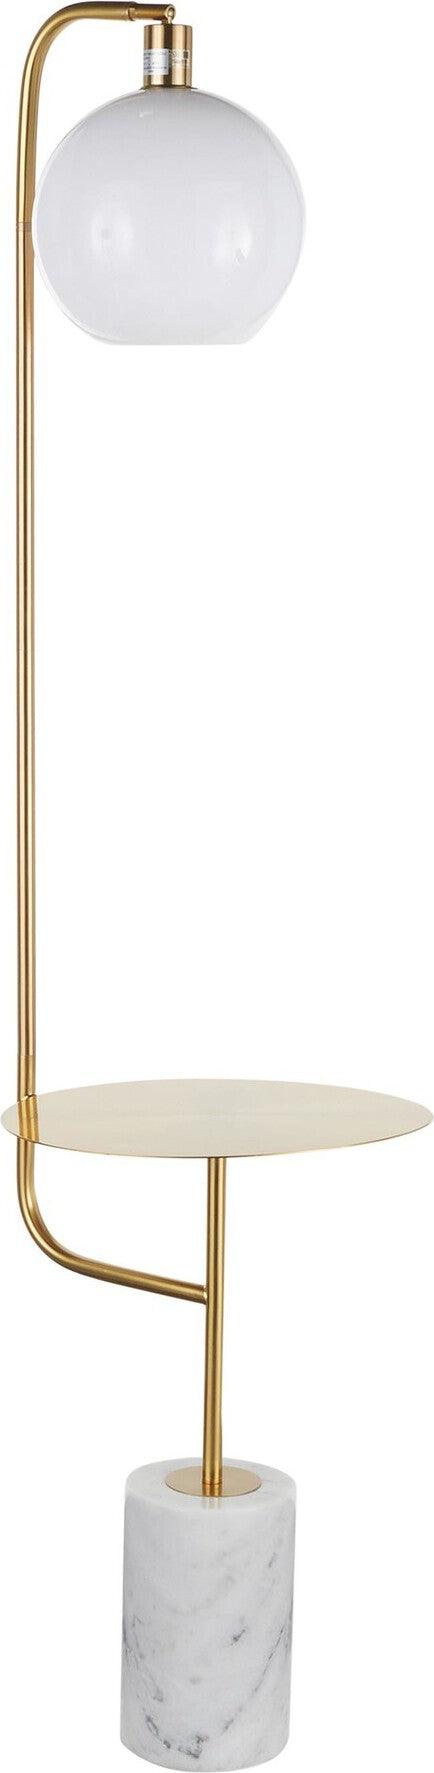 Lumisource Floor Lamps - Symbol Floor Lamp with Side Table White & Gold